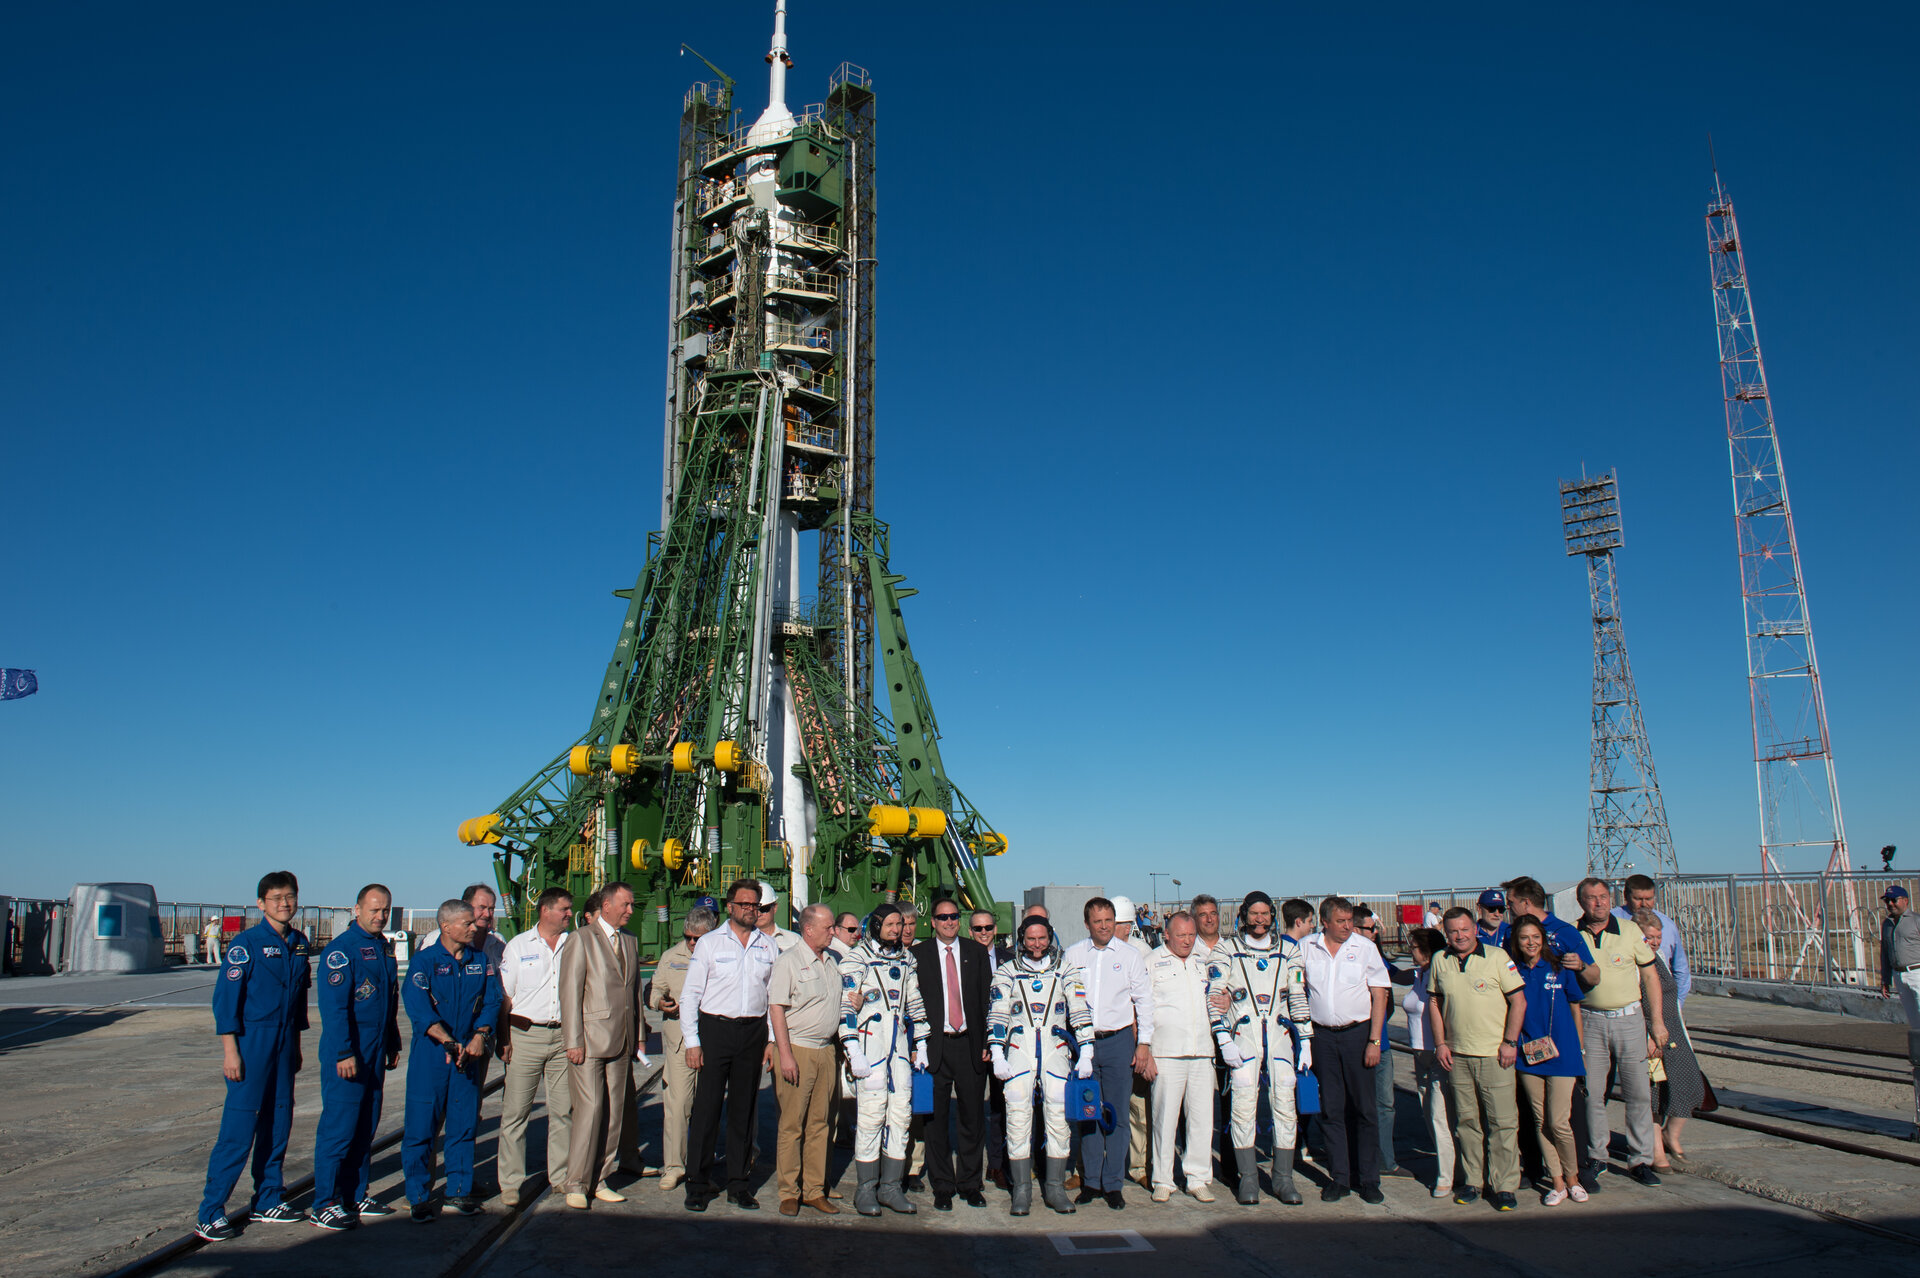 Expedition 52 crewmembers and dignitaries at the launch pad